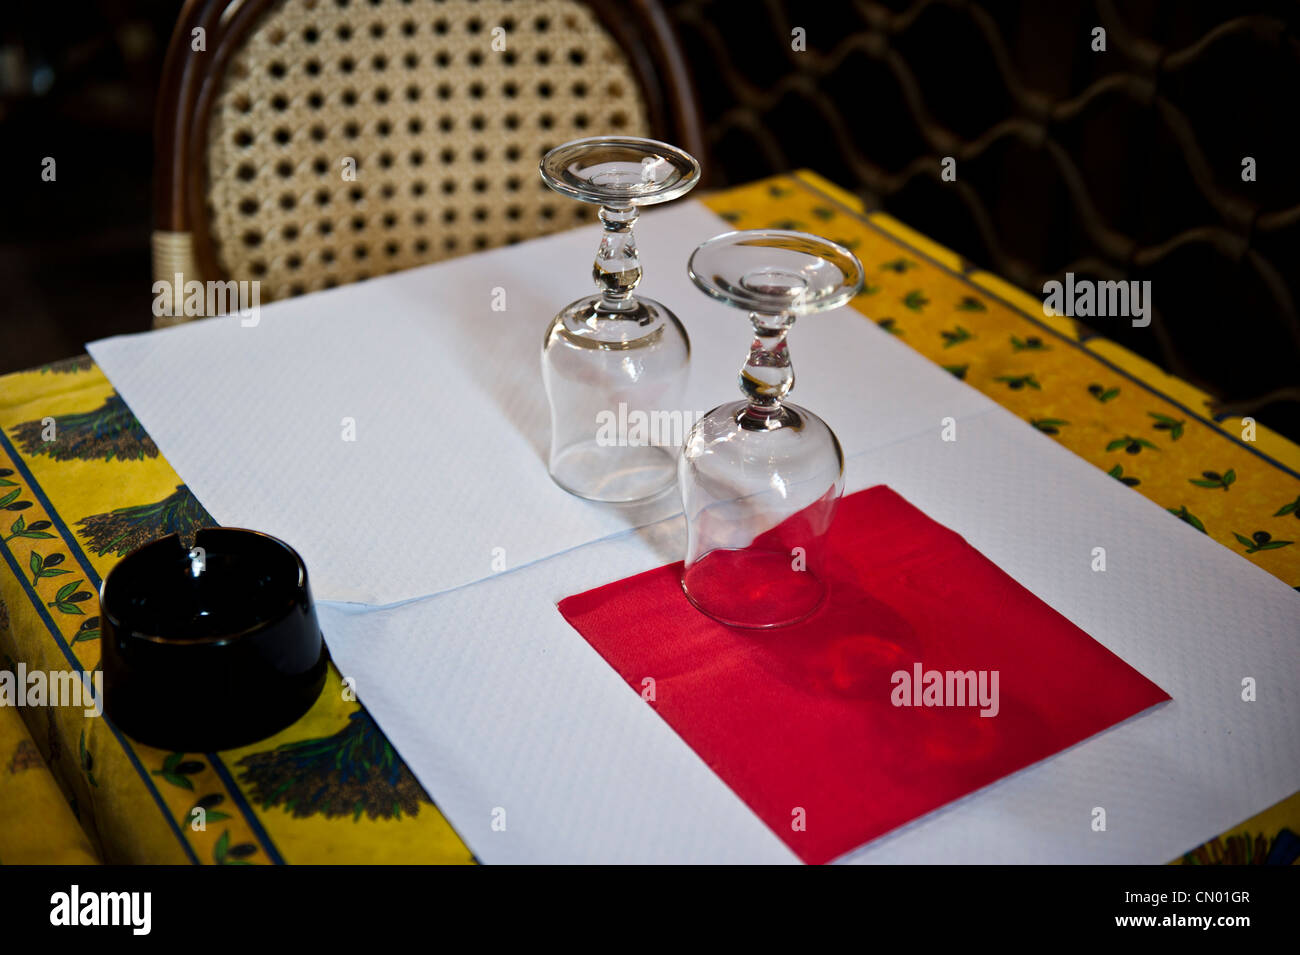 Table setting for two for a romantic dinner. Wine glasses are upside-down. Stock Photo